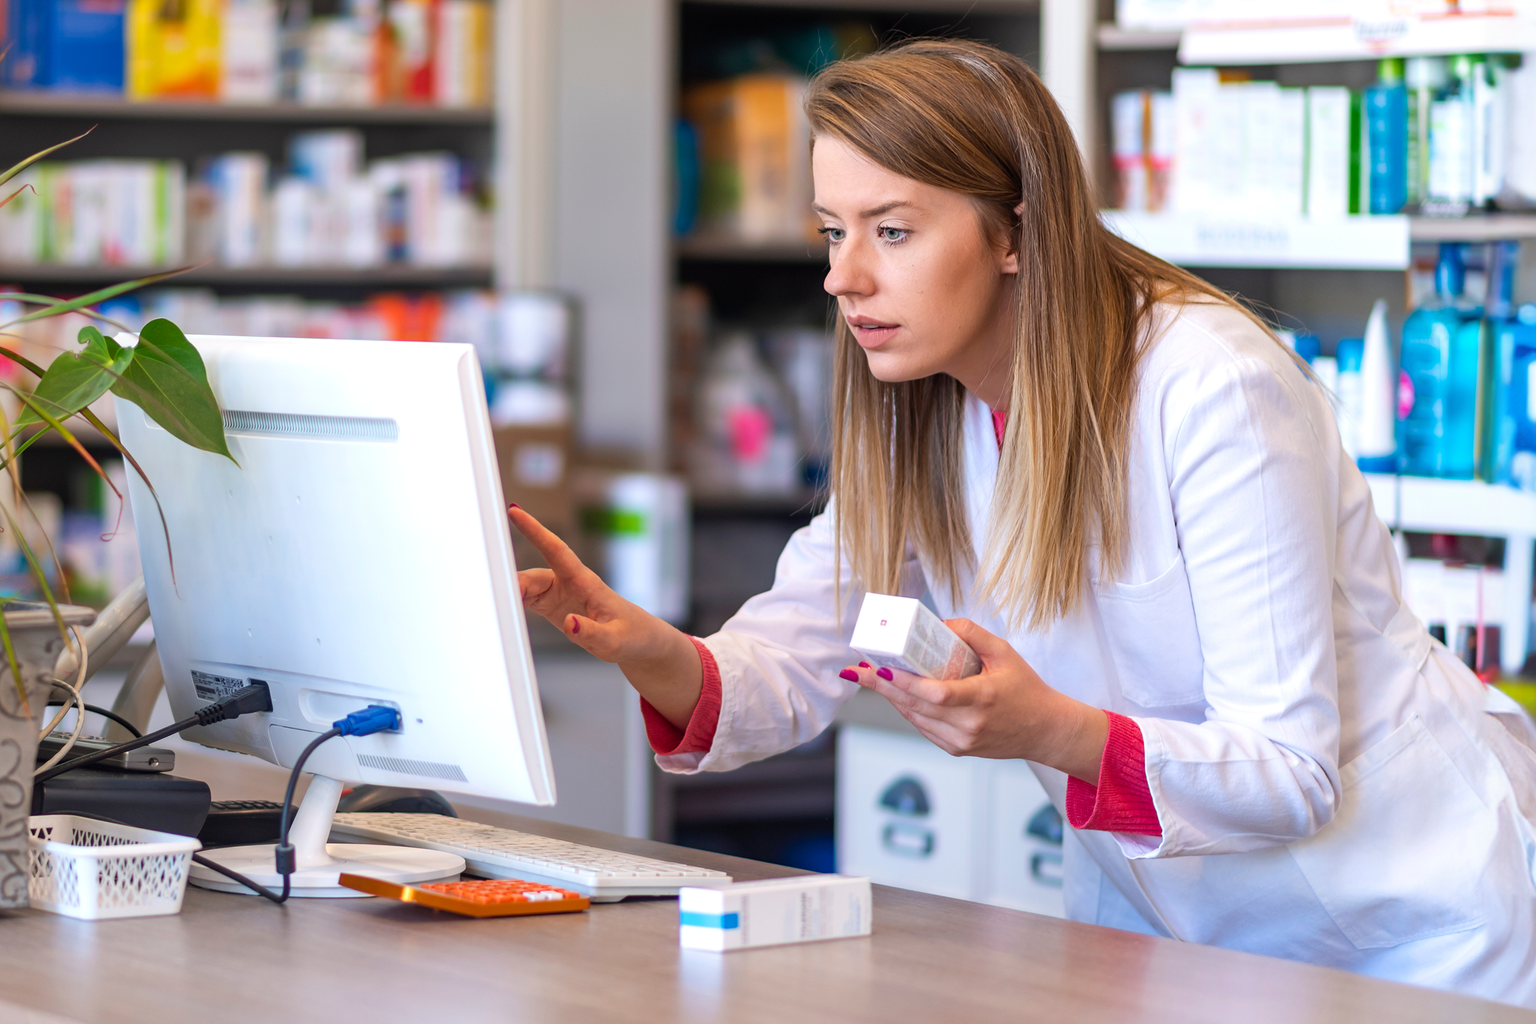 Burnout is hitting pharmacists, too